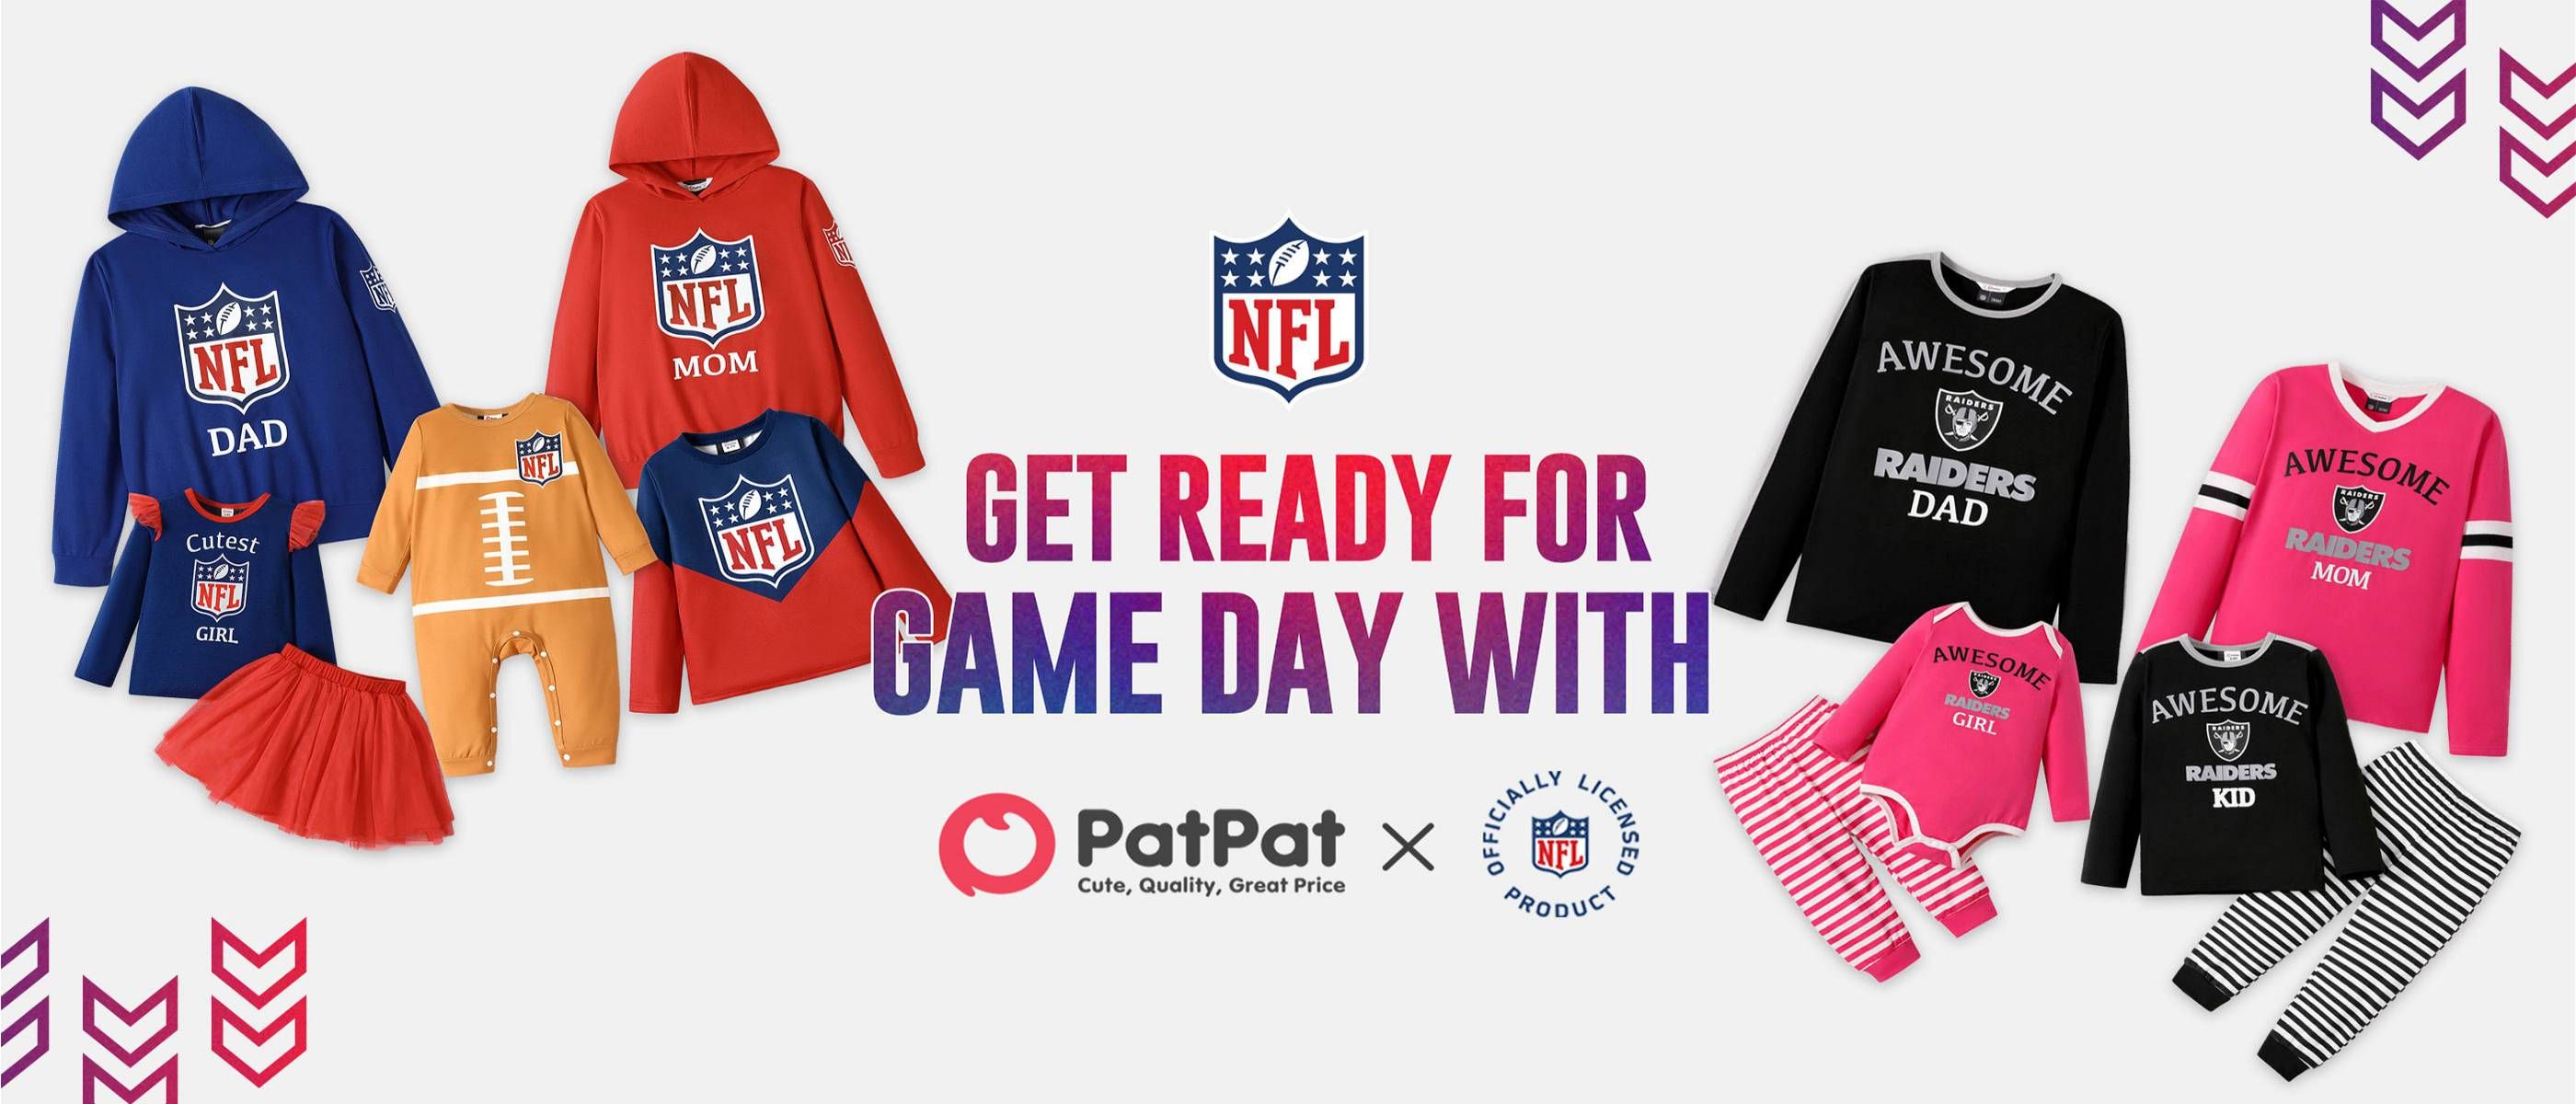 Get ready for game day with NFL x PatPat